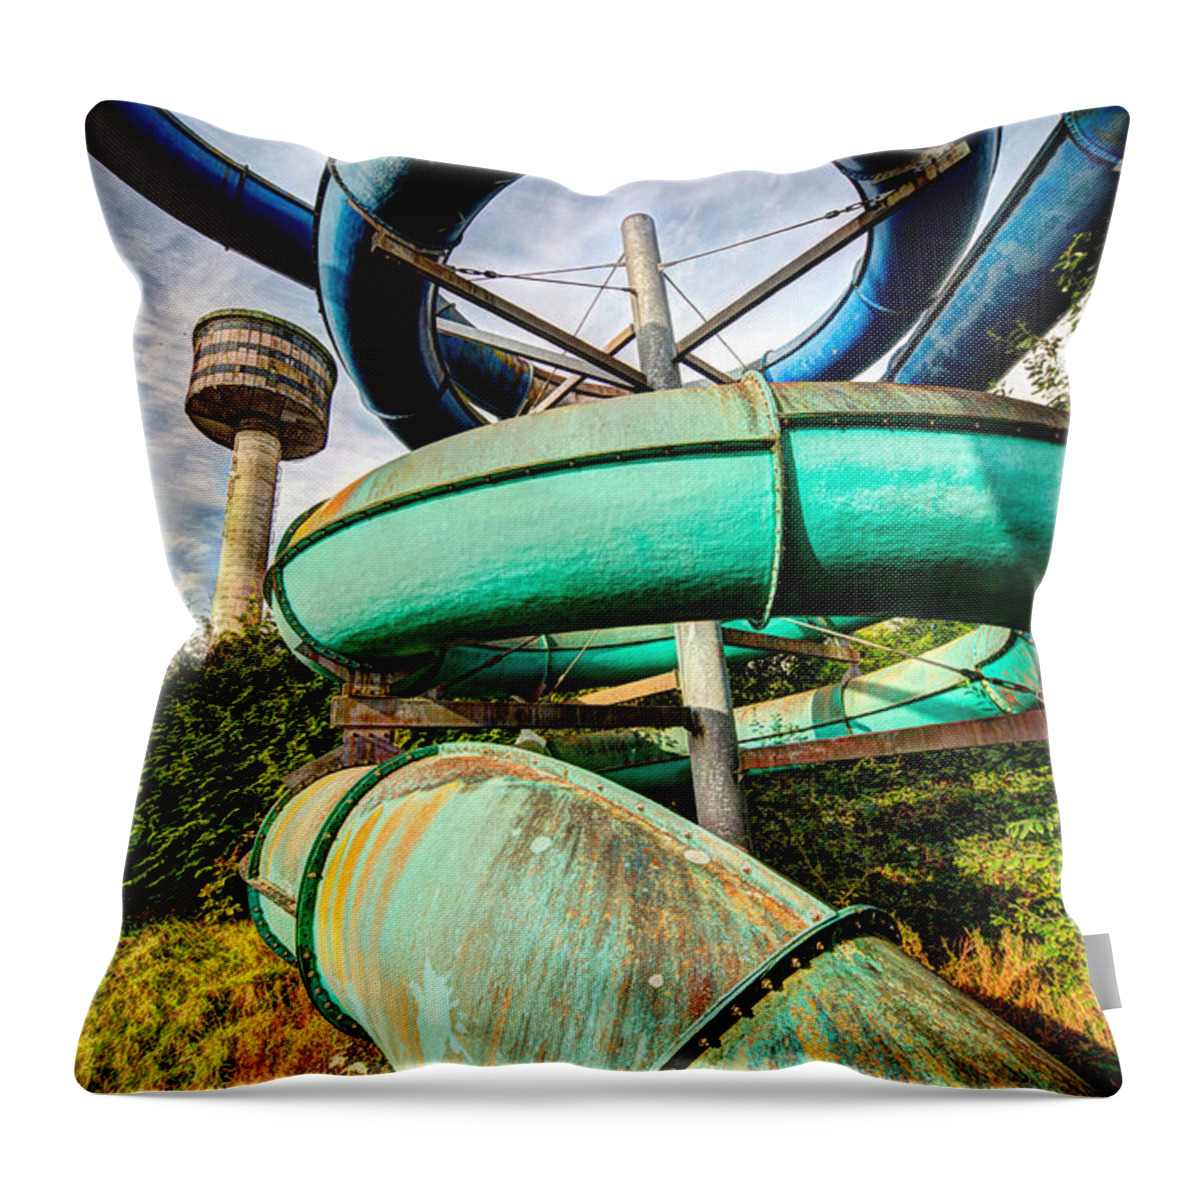 Abandoned Throw Pillow featuring the photograph abandoned swimming pool - Urban exploration #2 by Dirk Ercken